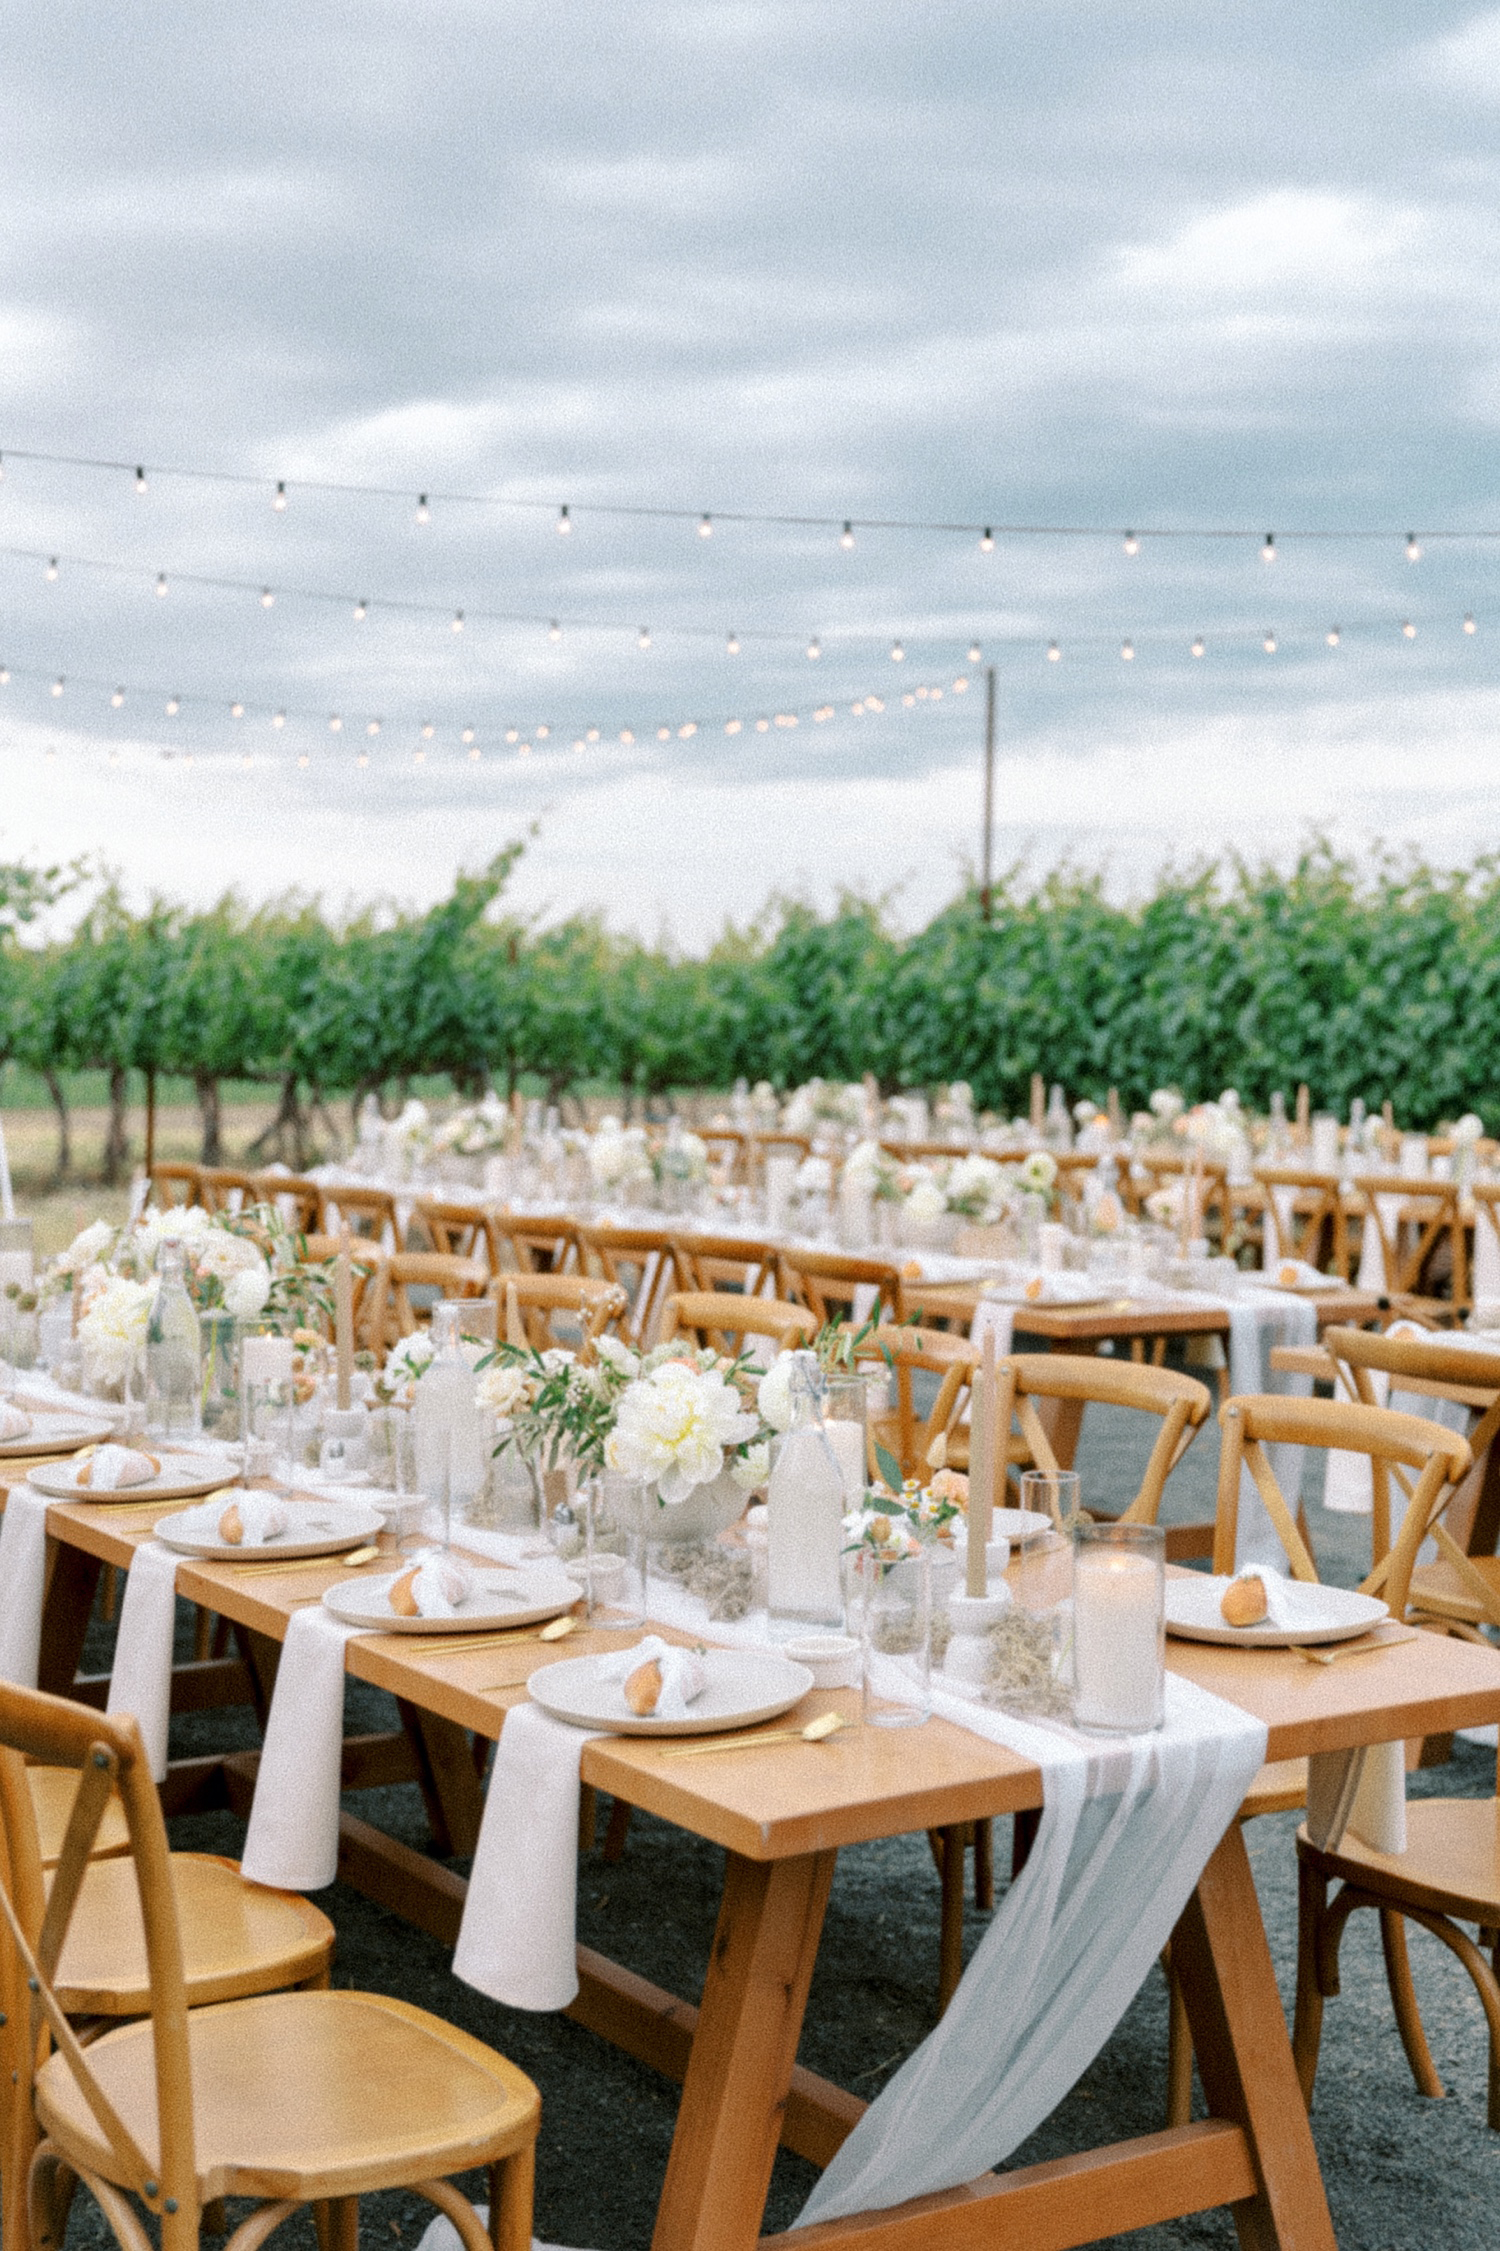 Wedding reception tables and decor for Kinhaven Winery Wedding